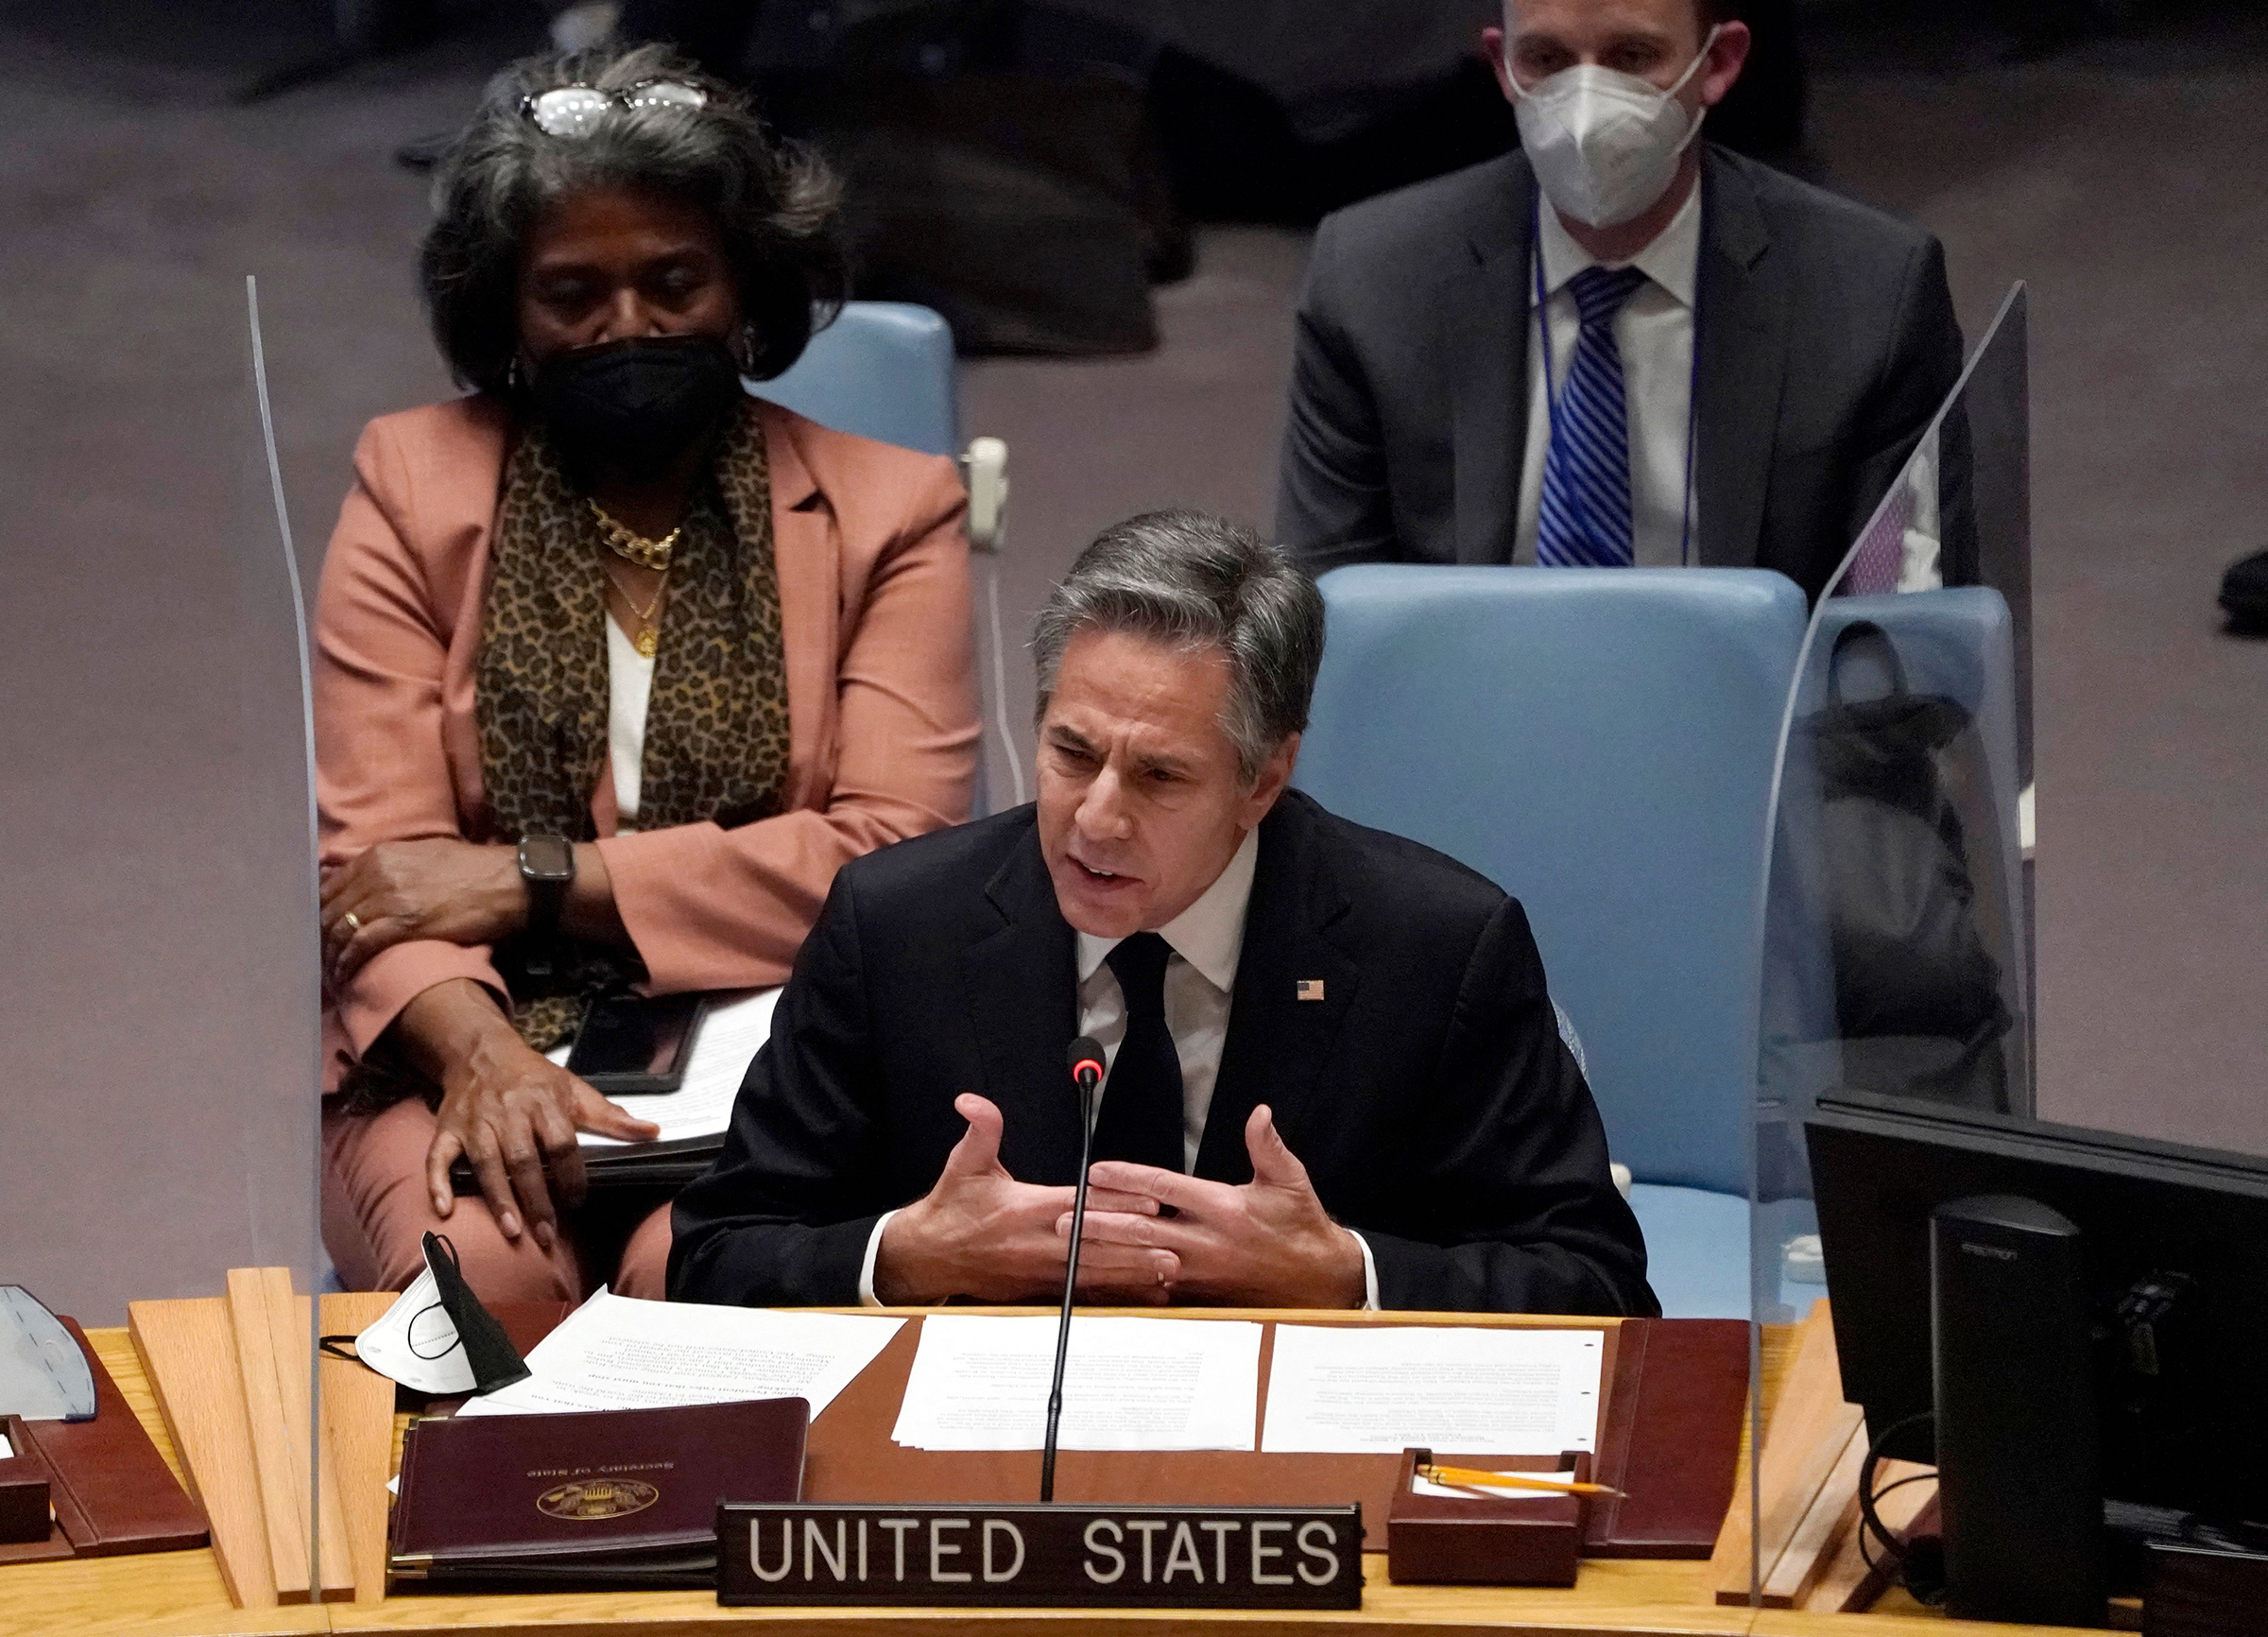 U.S. Secretary of State Antony Blinken speaks at a UN Security Council meeting on Ukraine in New York City, on Feb. 17, 2022. (Timothy A. Clary—AFP/Getty Images)